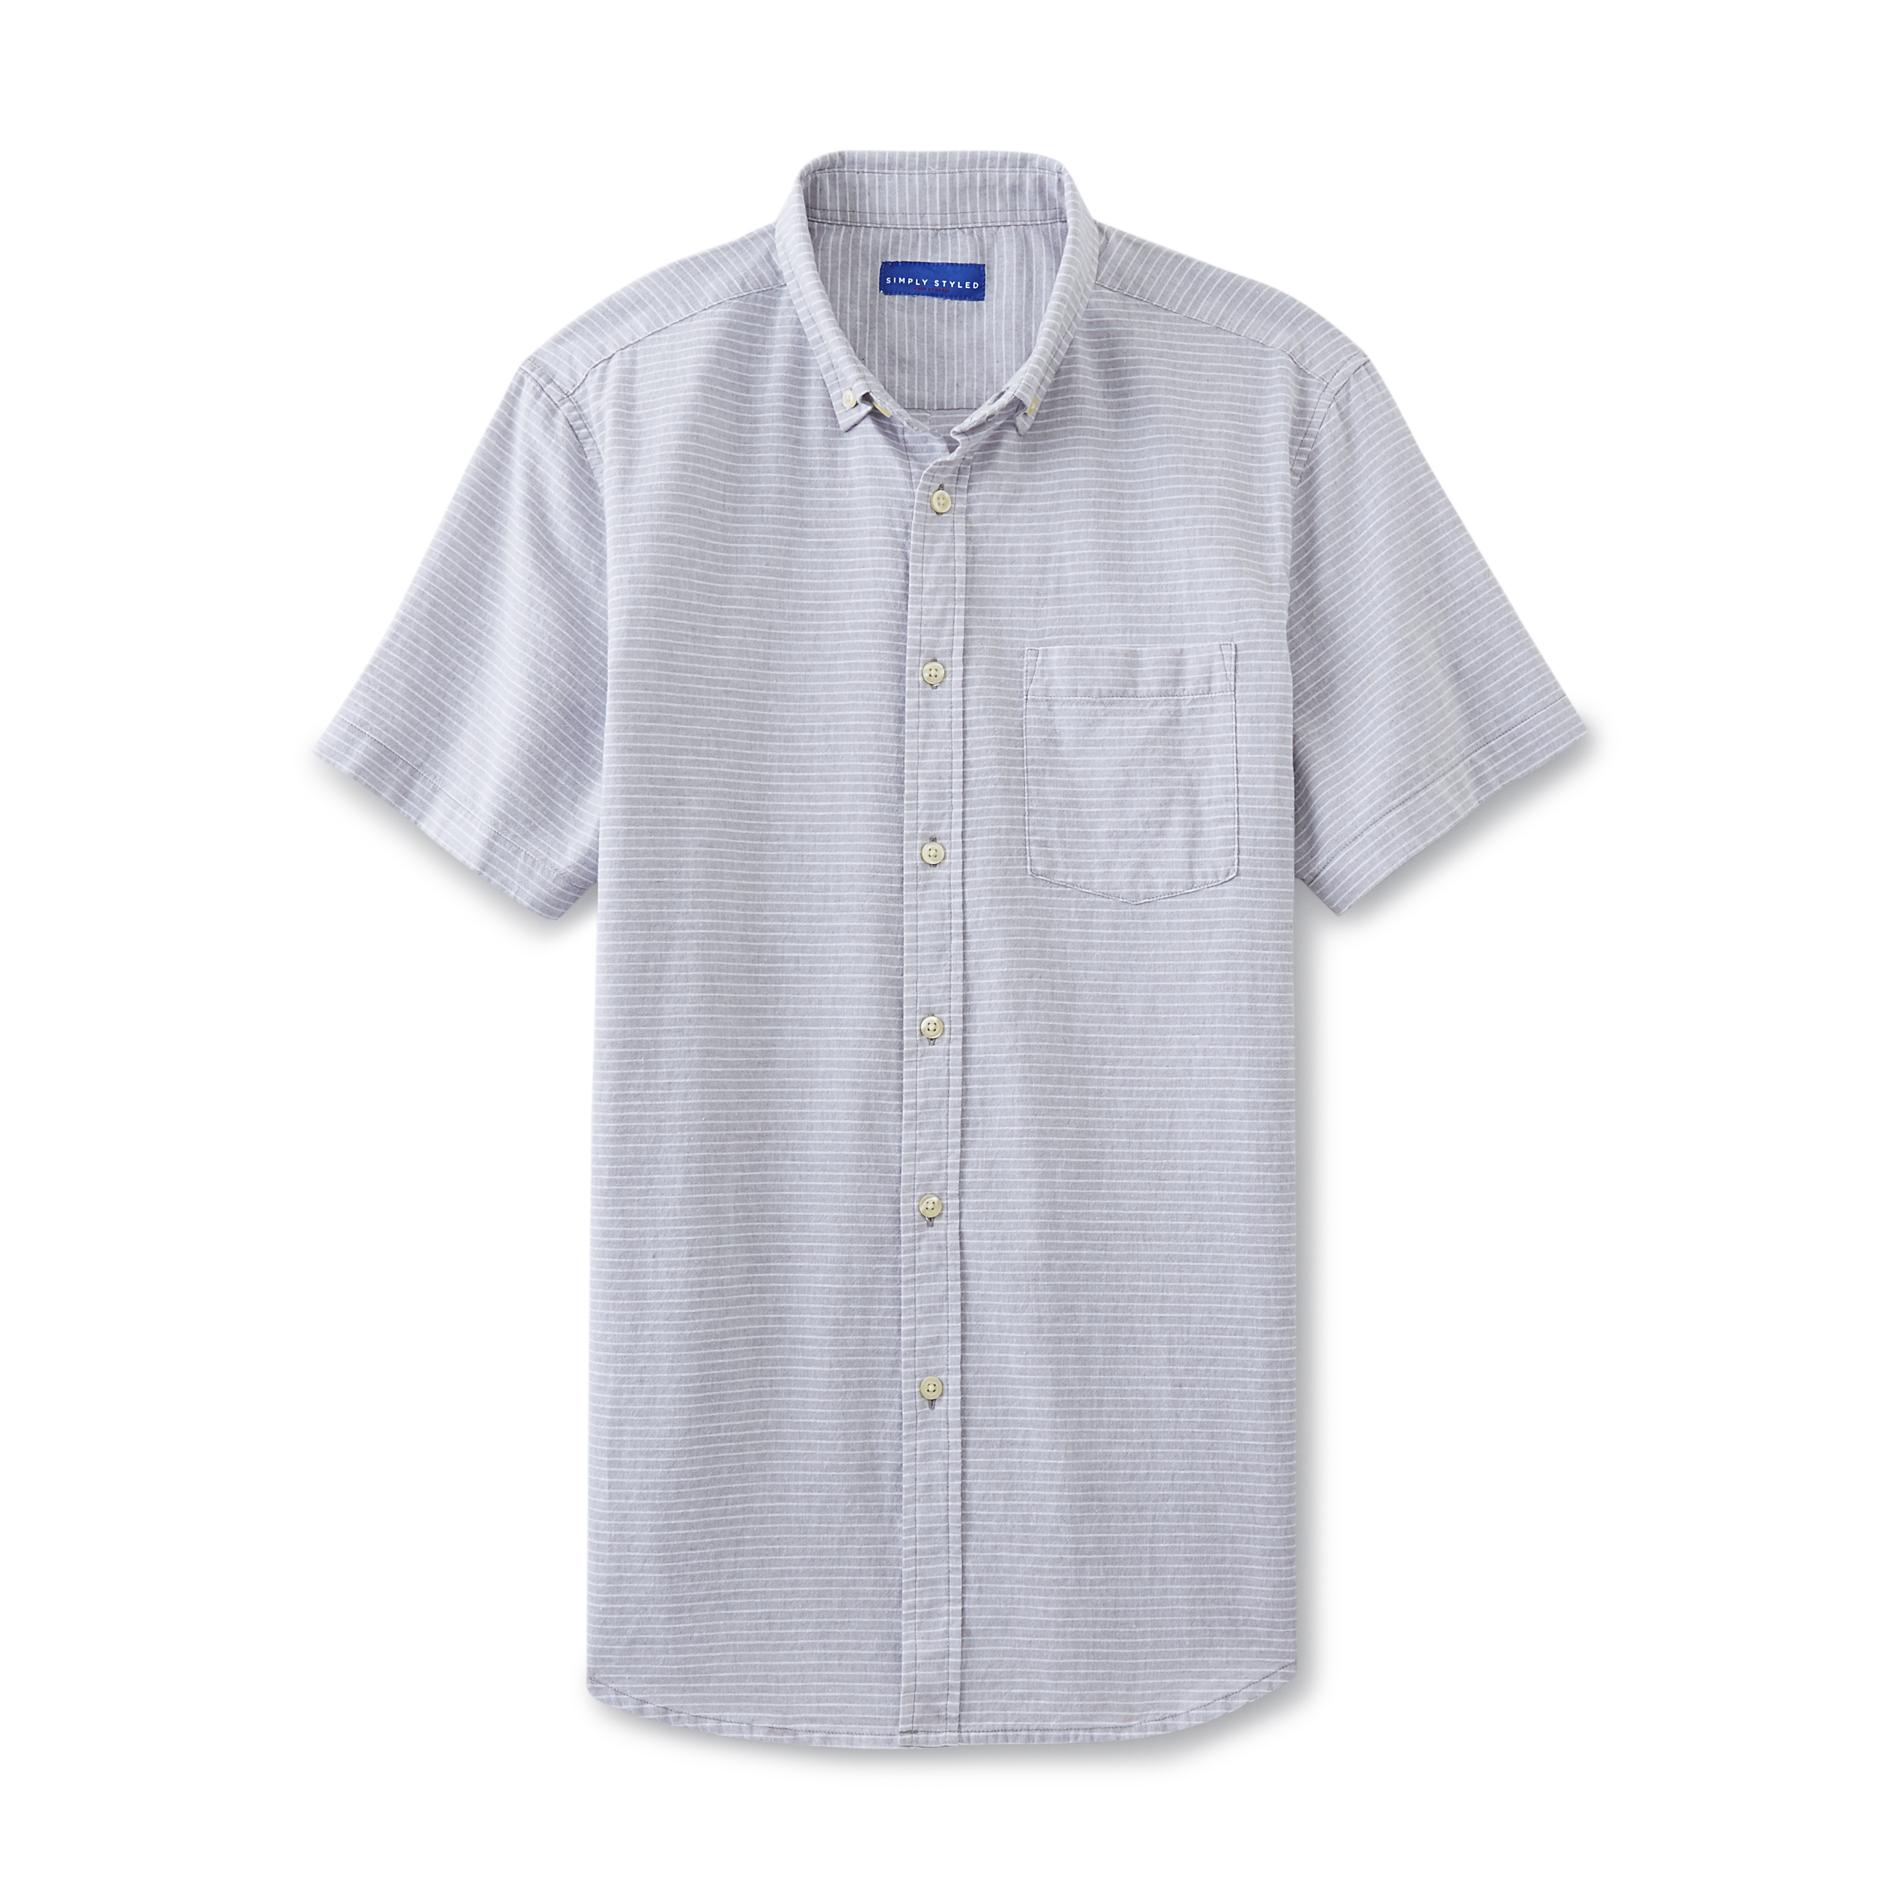 Simply Styled Men's Short-Sleeve Shirt - Striped